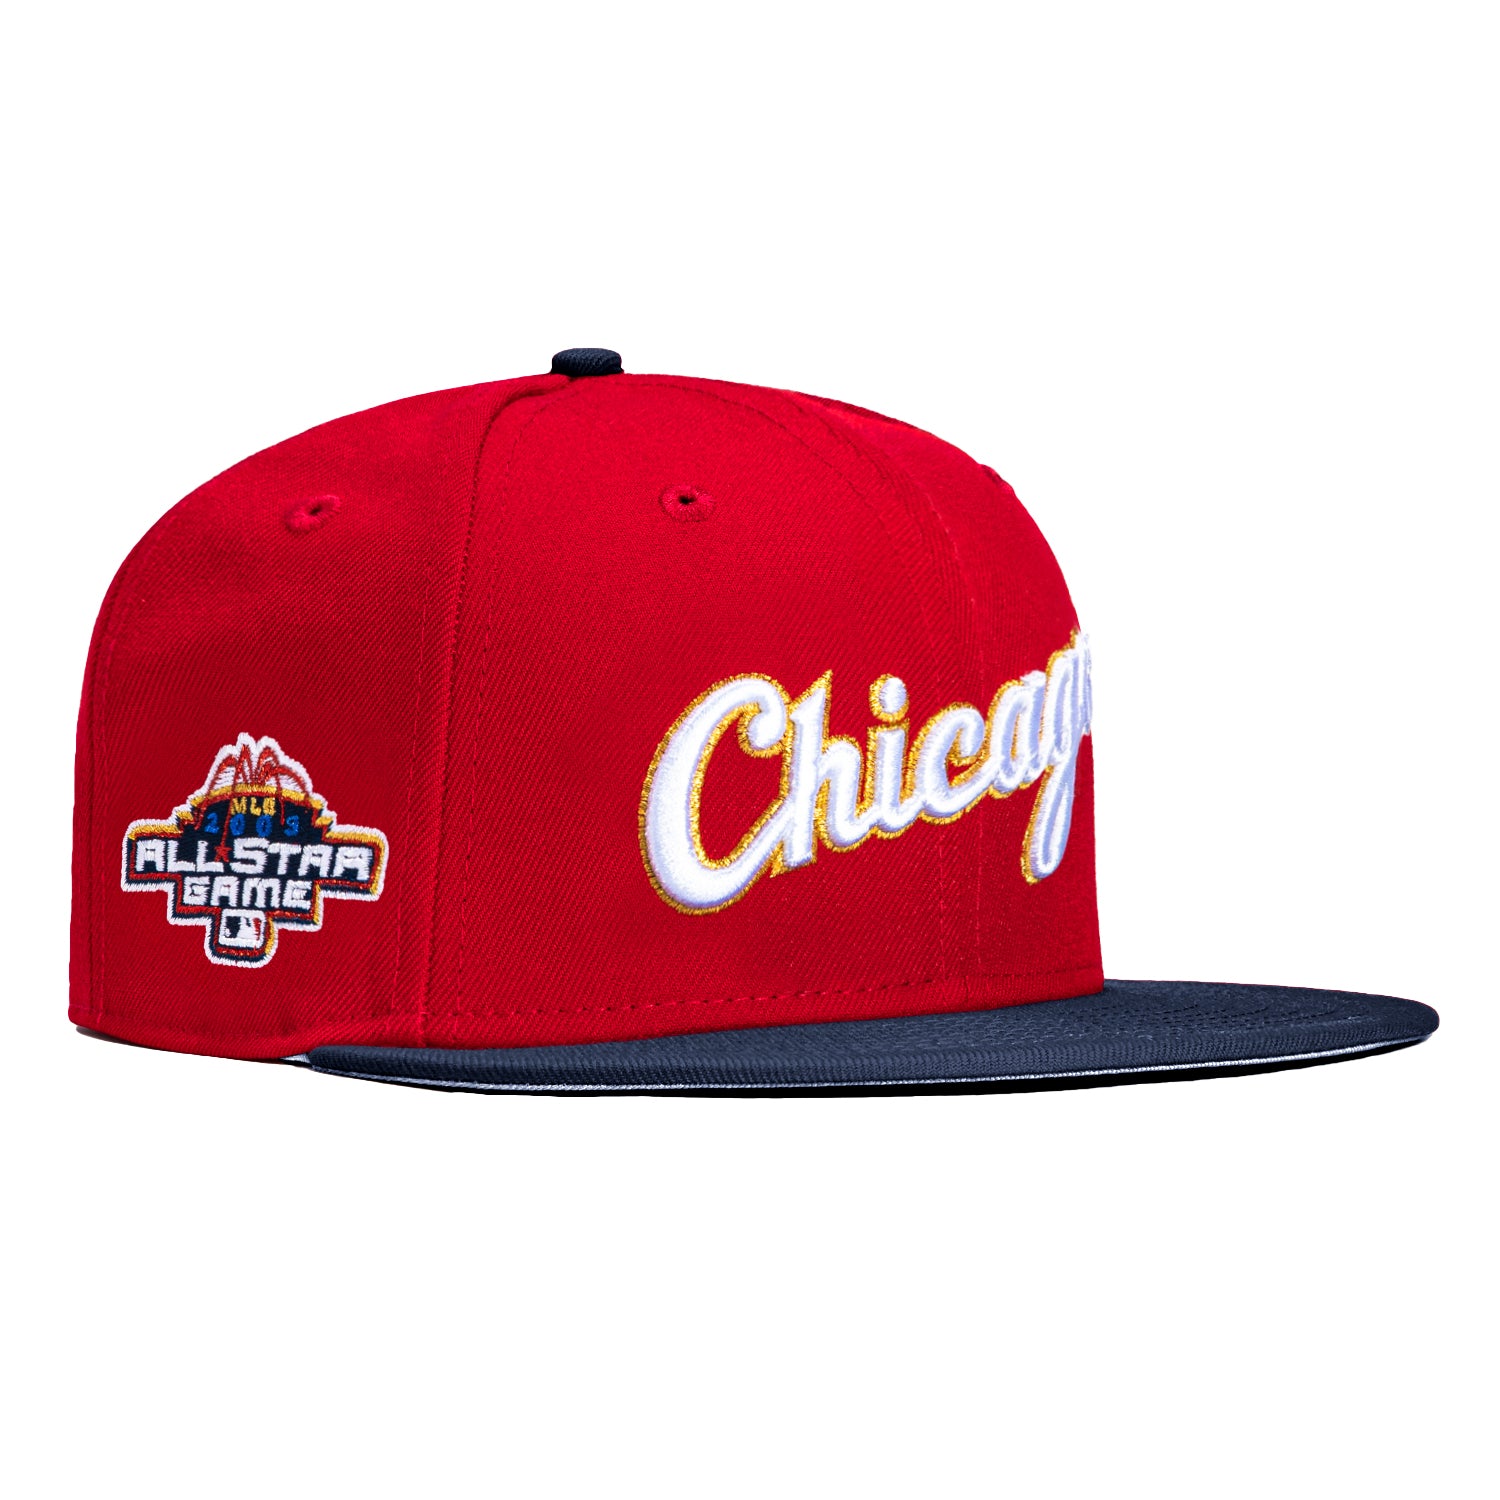 New Era 59FIFTY Fourth Chicago White Sox 2003 All Star Game Patch Hat - Red, Navy Red/Navy / 7 1/8